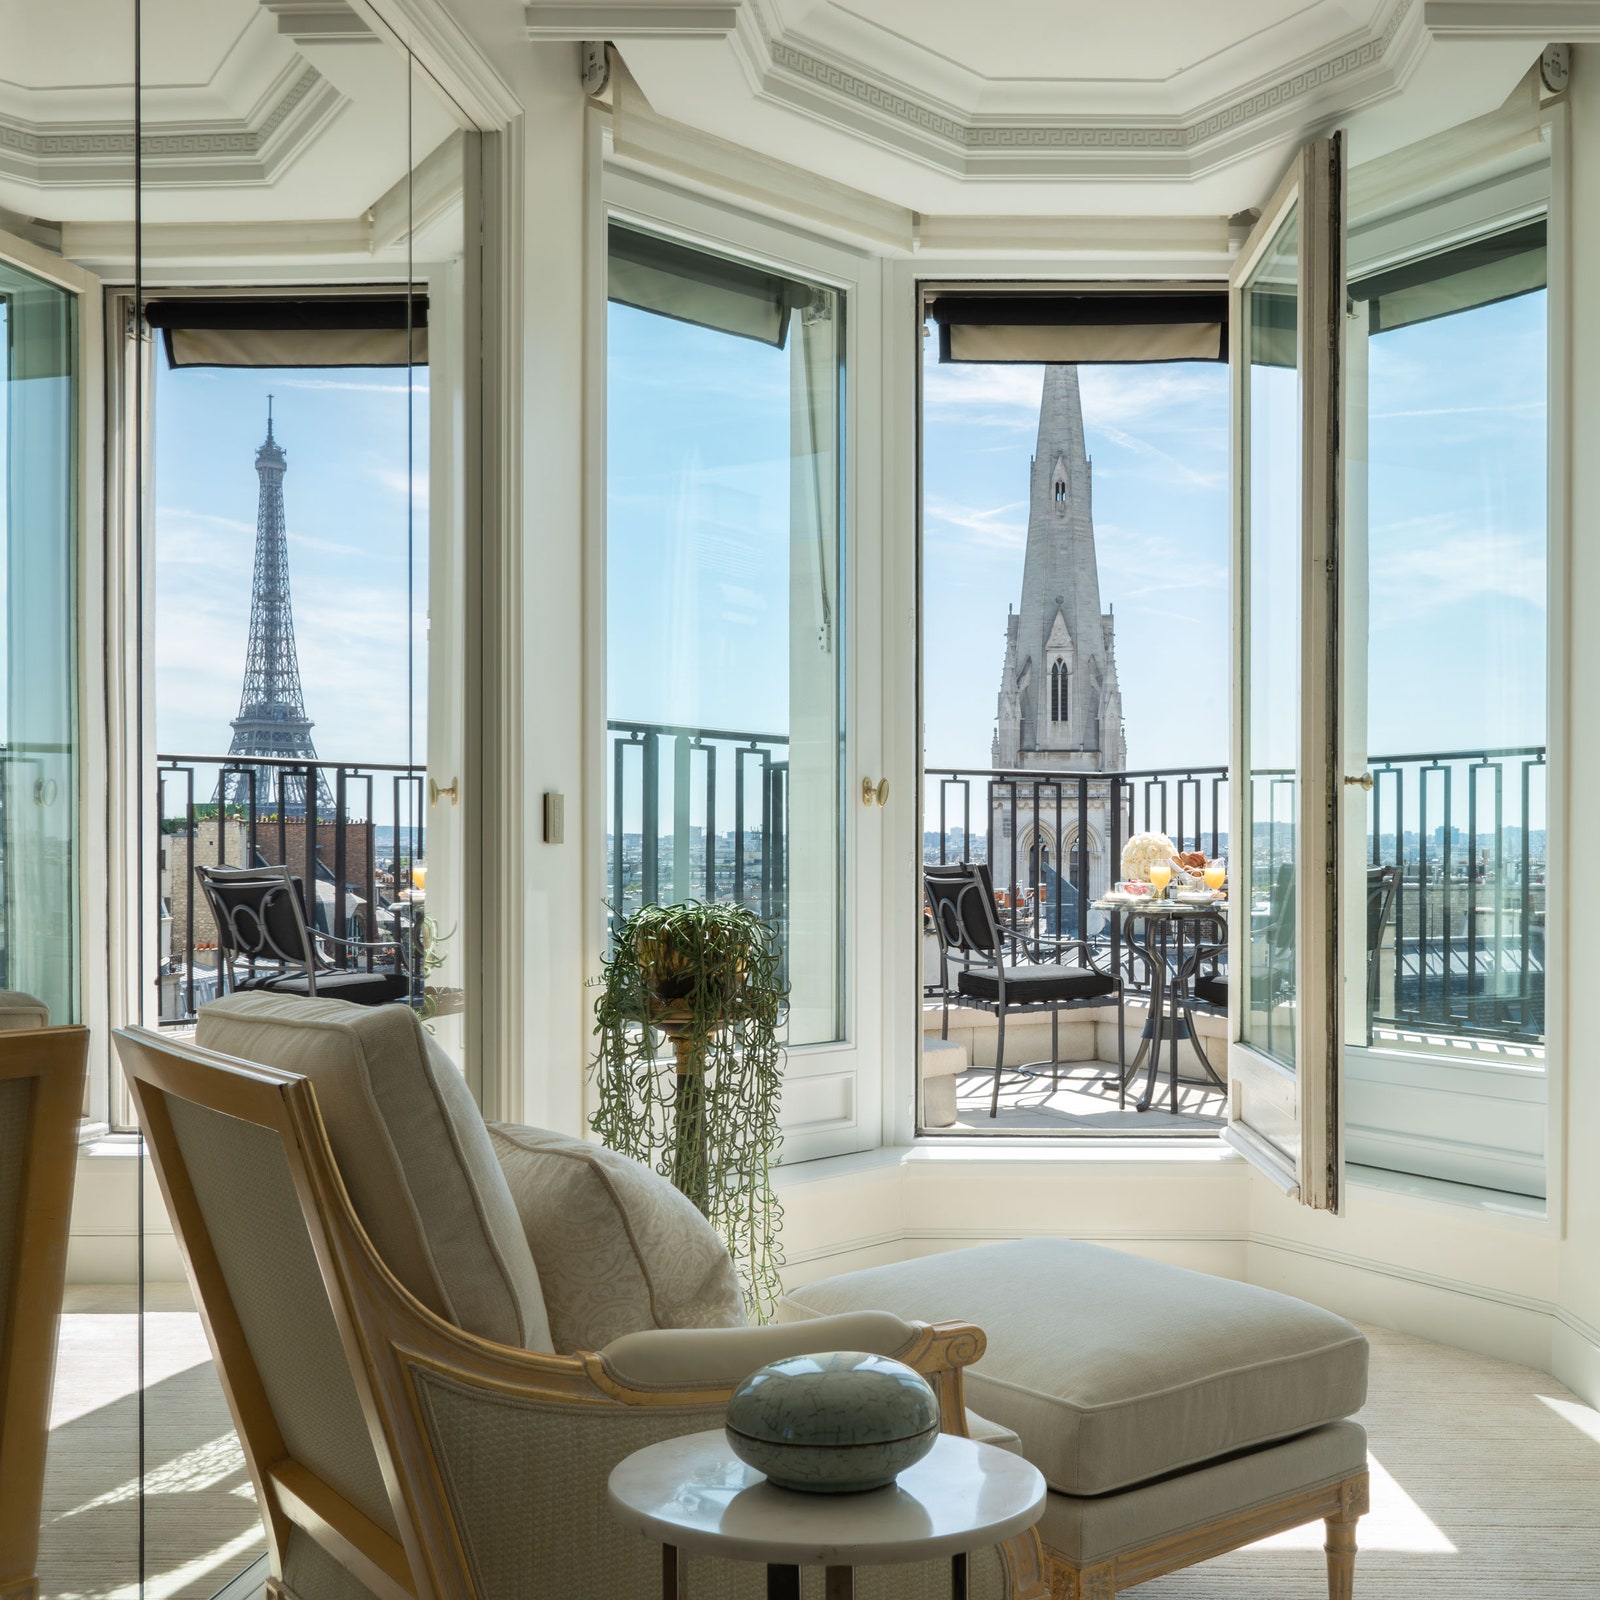 The best hotels near the Eiffel Tower